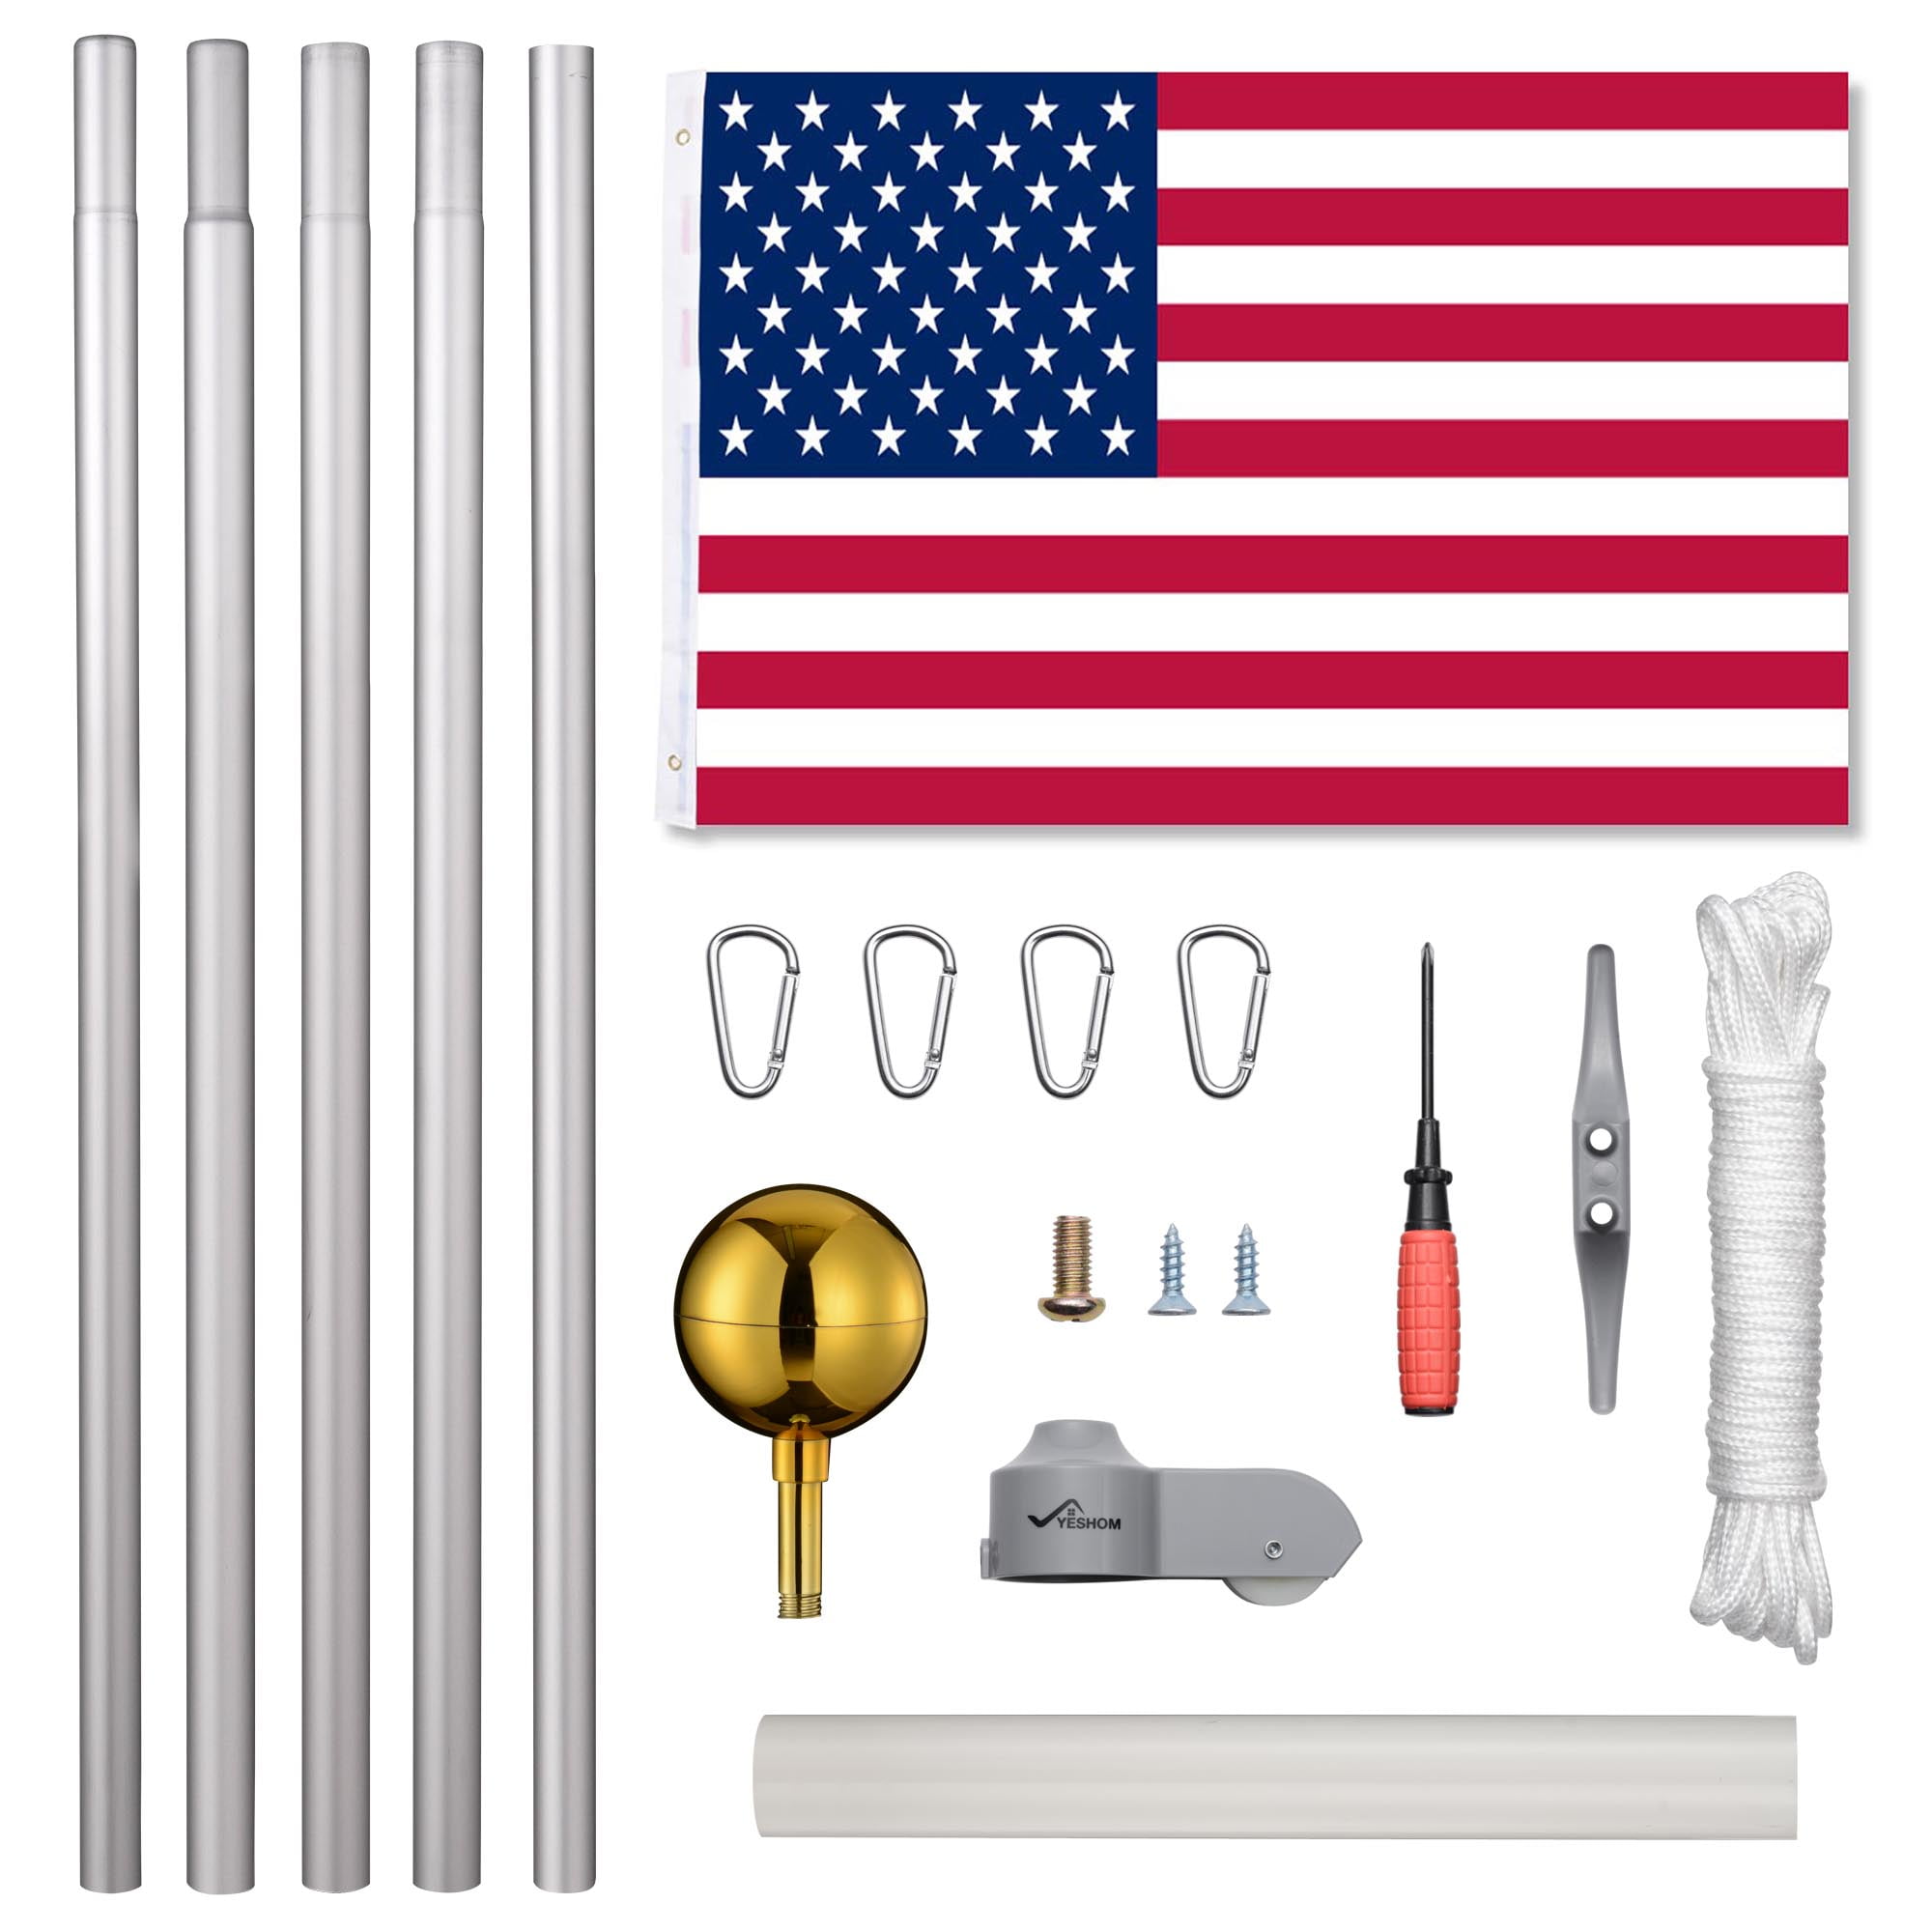 6 ft ZENY 20FT Sectional Flag Pole 3x5 American Flag & Ball Top Kit Hardware Outdoor Garden Halyard Pole Inground Flagpole 